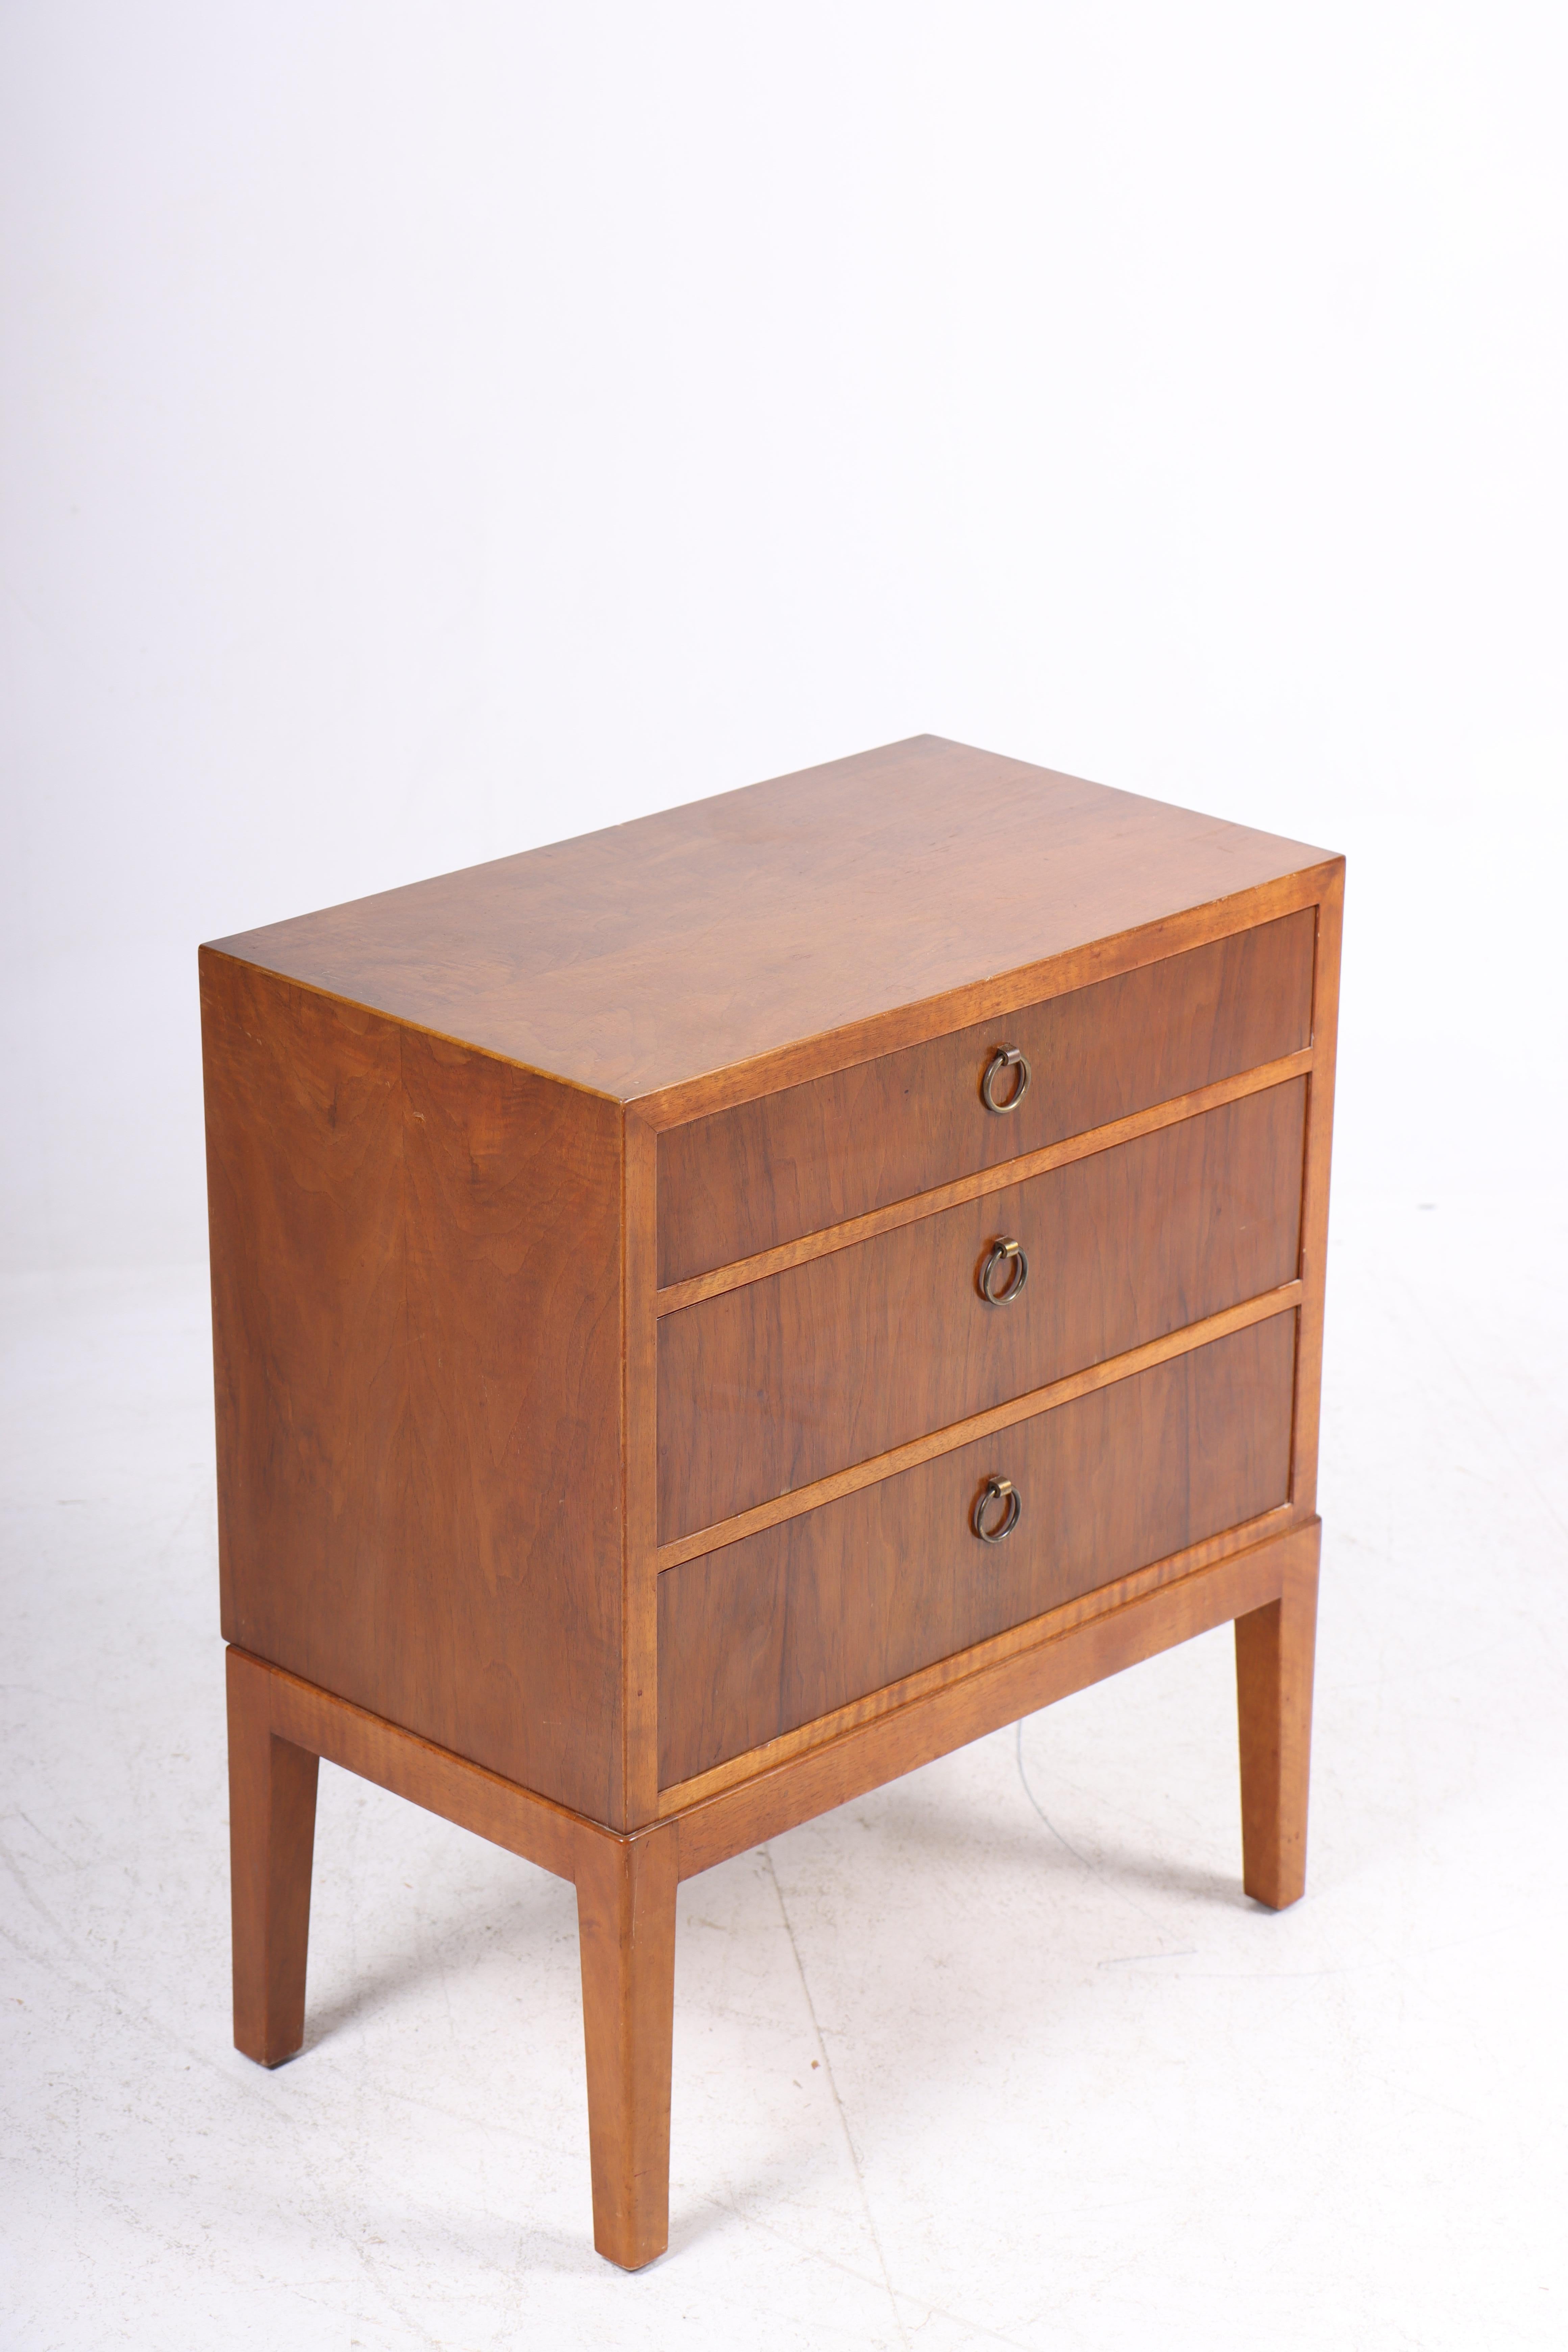 Scandinavian Modern Midcentury Chest of Drawers by Thorald Madsen, Danish Design, 1950s For Sale